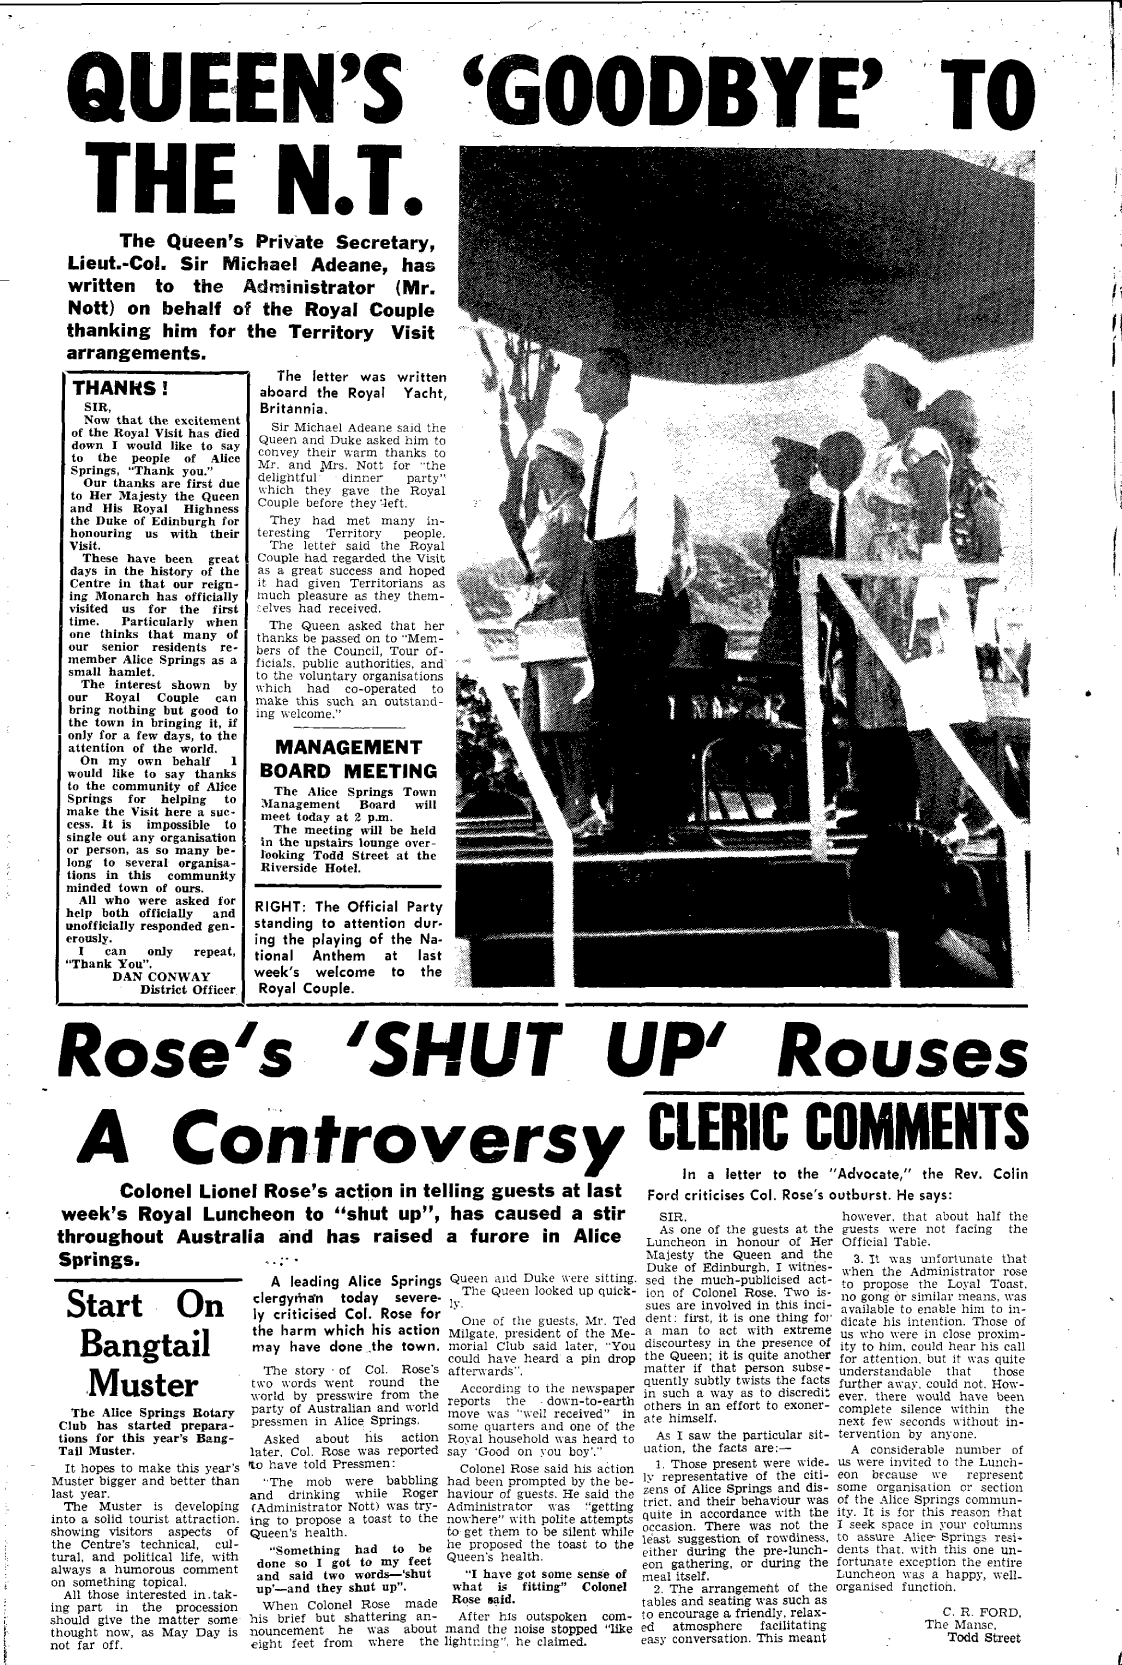 Black and white archival newspaper with front page about the Queen's 1963 visit to Alice Springs.